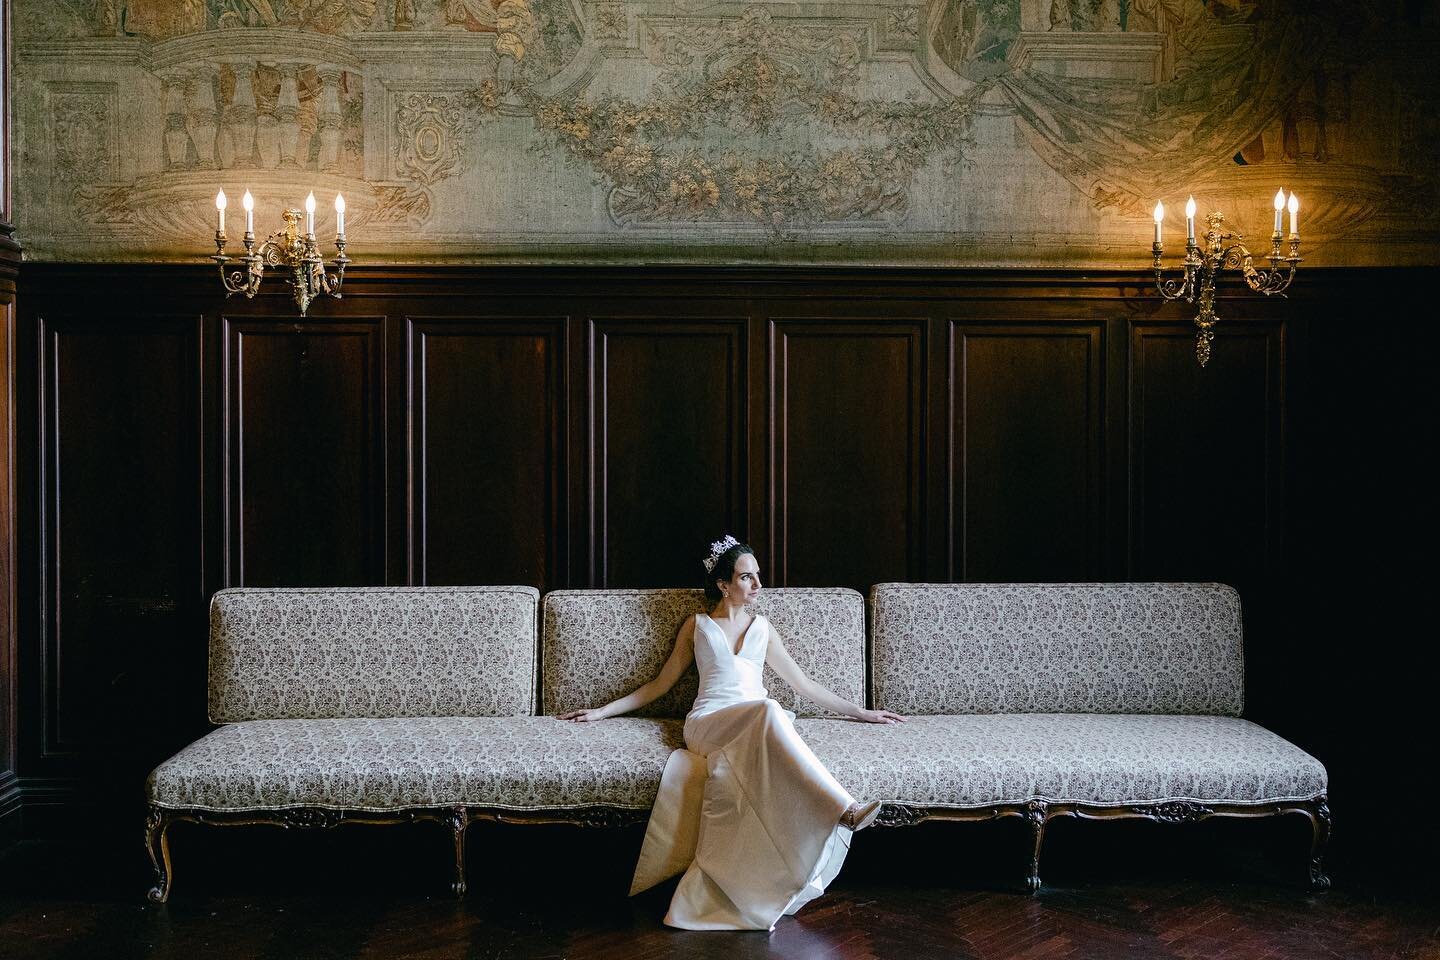 GOT Mood, An stunning Wedding in a Castle. | A&amp;M ✨

Dress @justinalexander 
Shoes @badgleymischka 
Edited with @refinedpresets 

Mexico Wedding Photographer 🇲🇽
Worldwide Destination Wedding Photographer ✨

#destinationweddingphotographer #desti